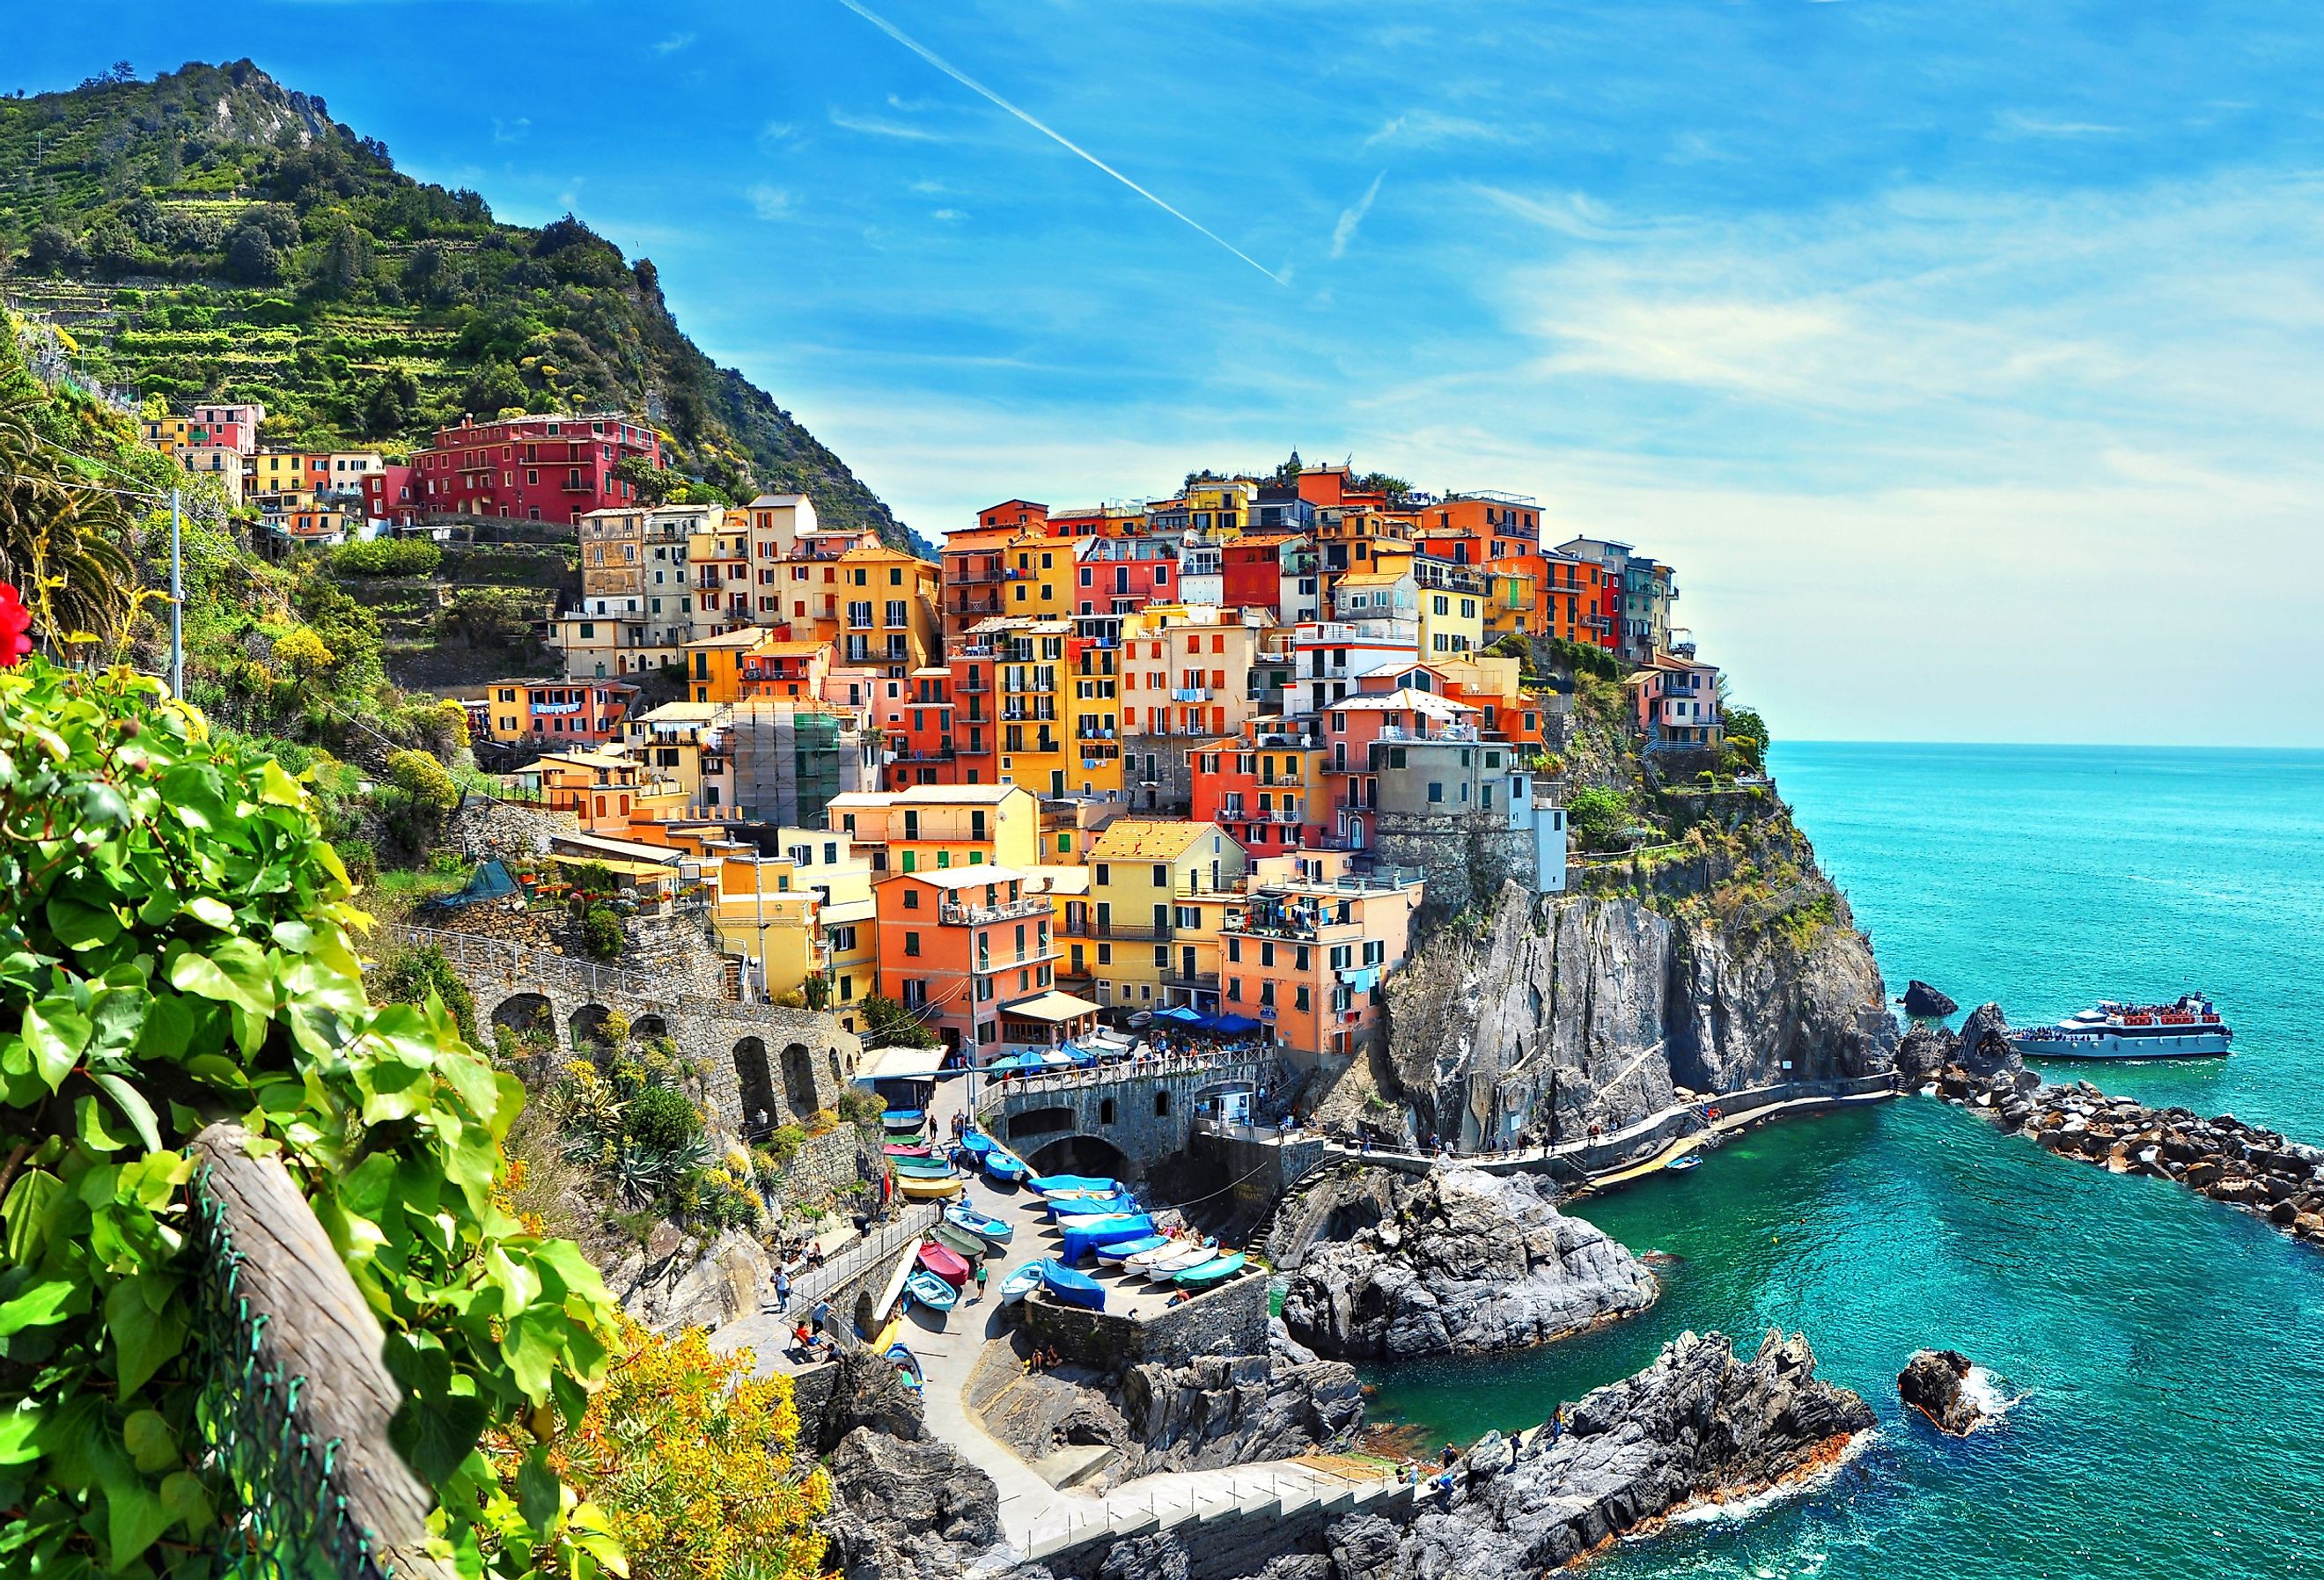 Beautiful view of Manarola town, one of five famous colorful villages of Cinque Terre in Italy. Image credit: Minoli via Shutterstock 